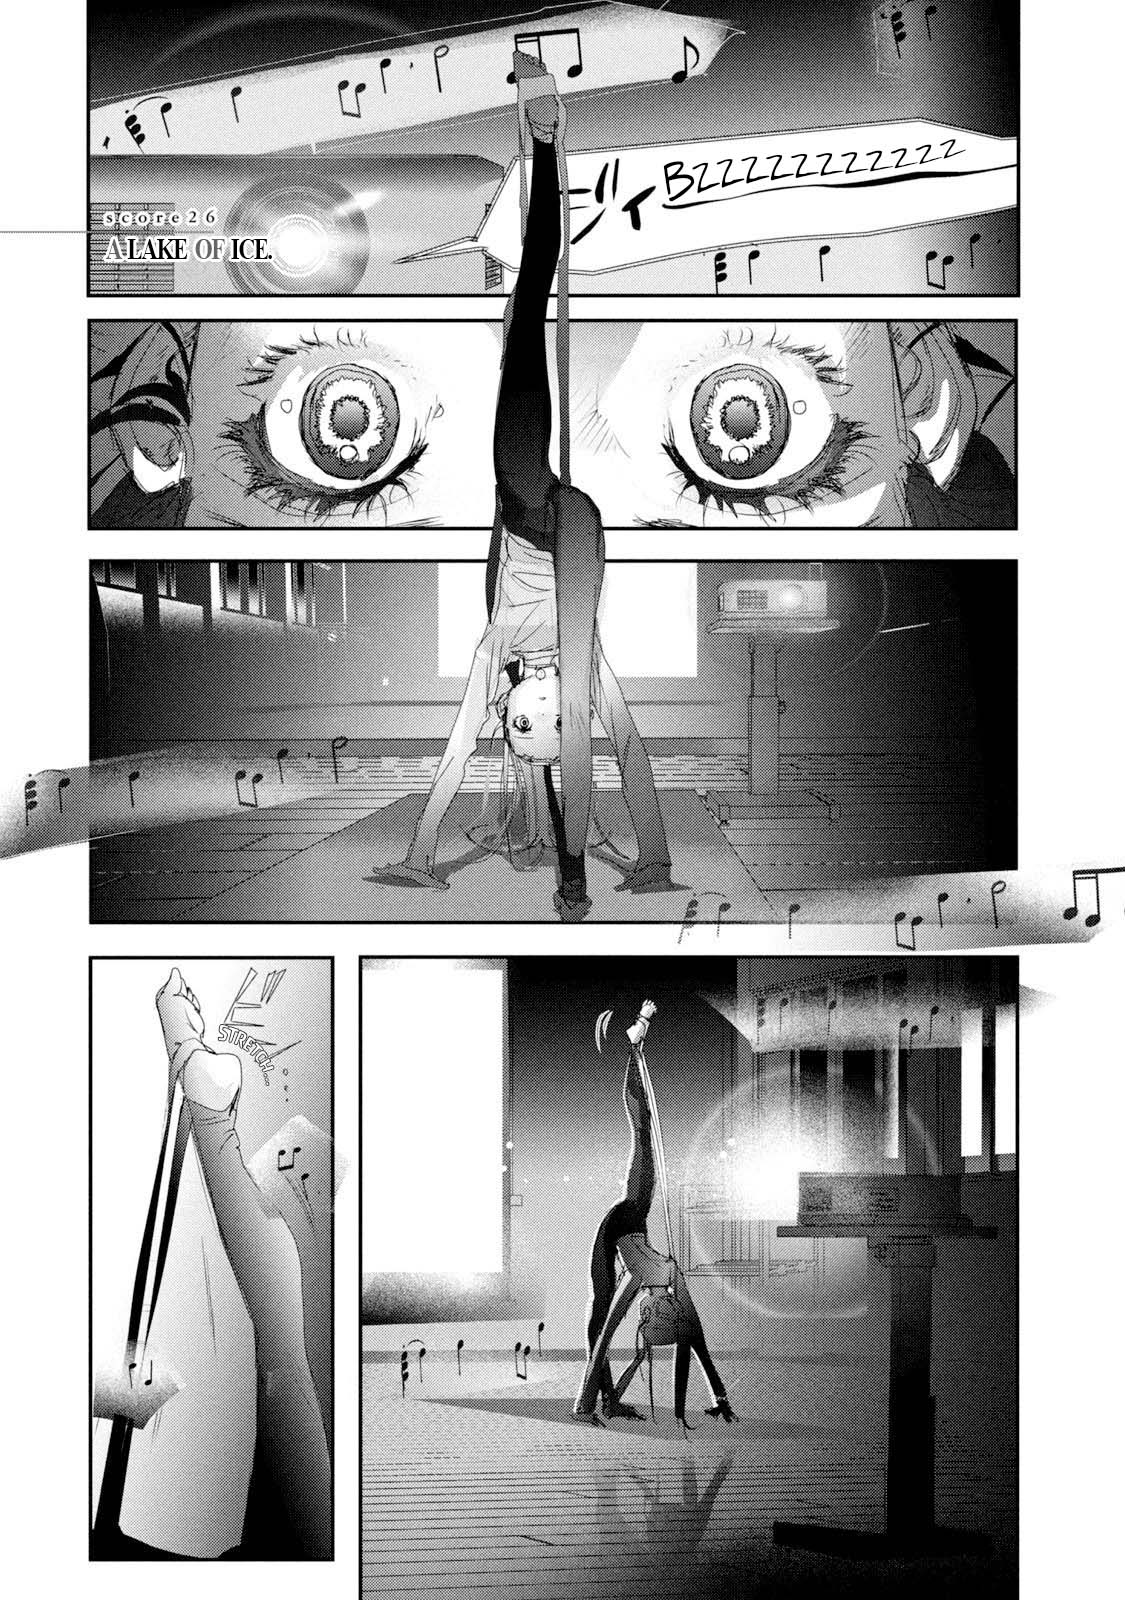 Medalist - 26 page 1-98a3d42f